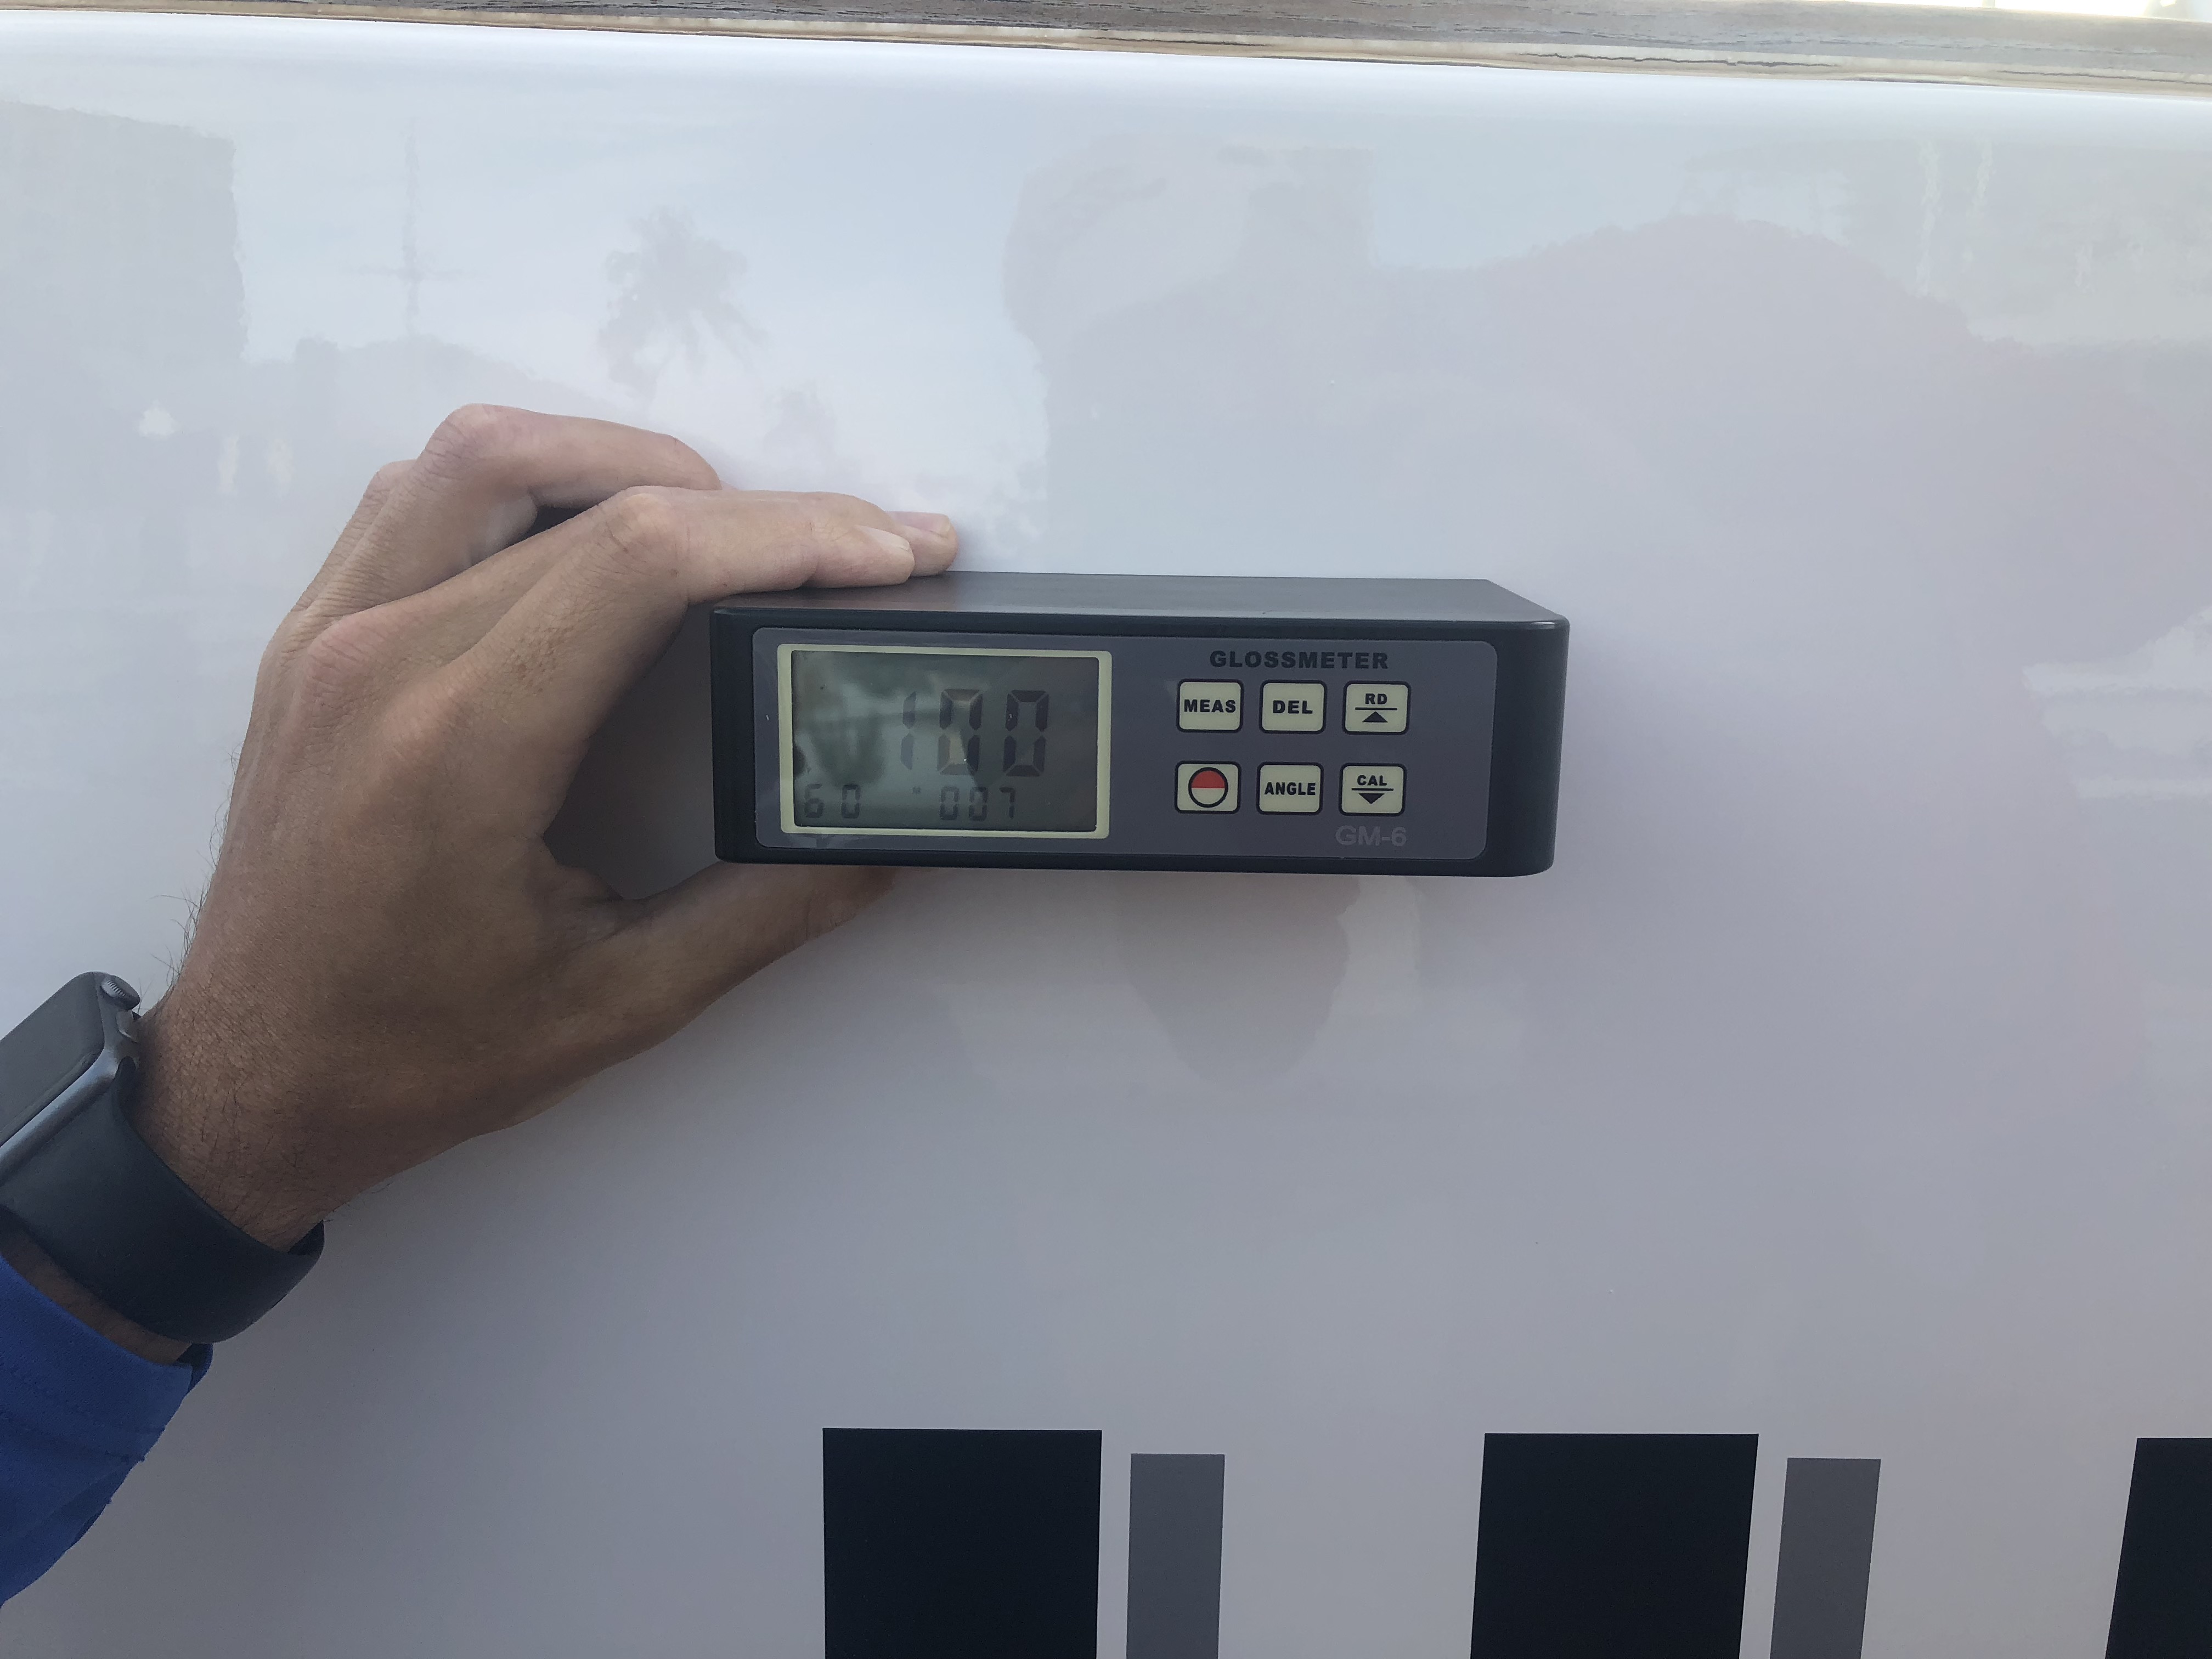 Man holding gloss meter with 100 reading on the transom of the 95' Heisley